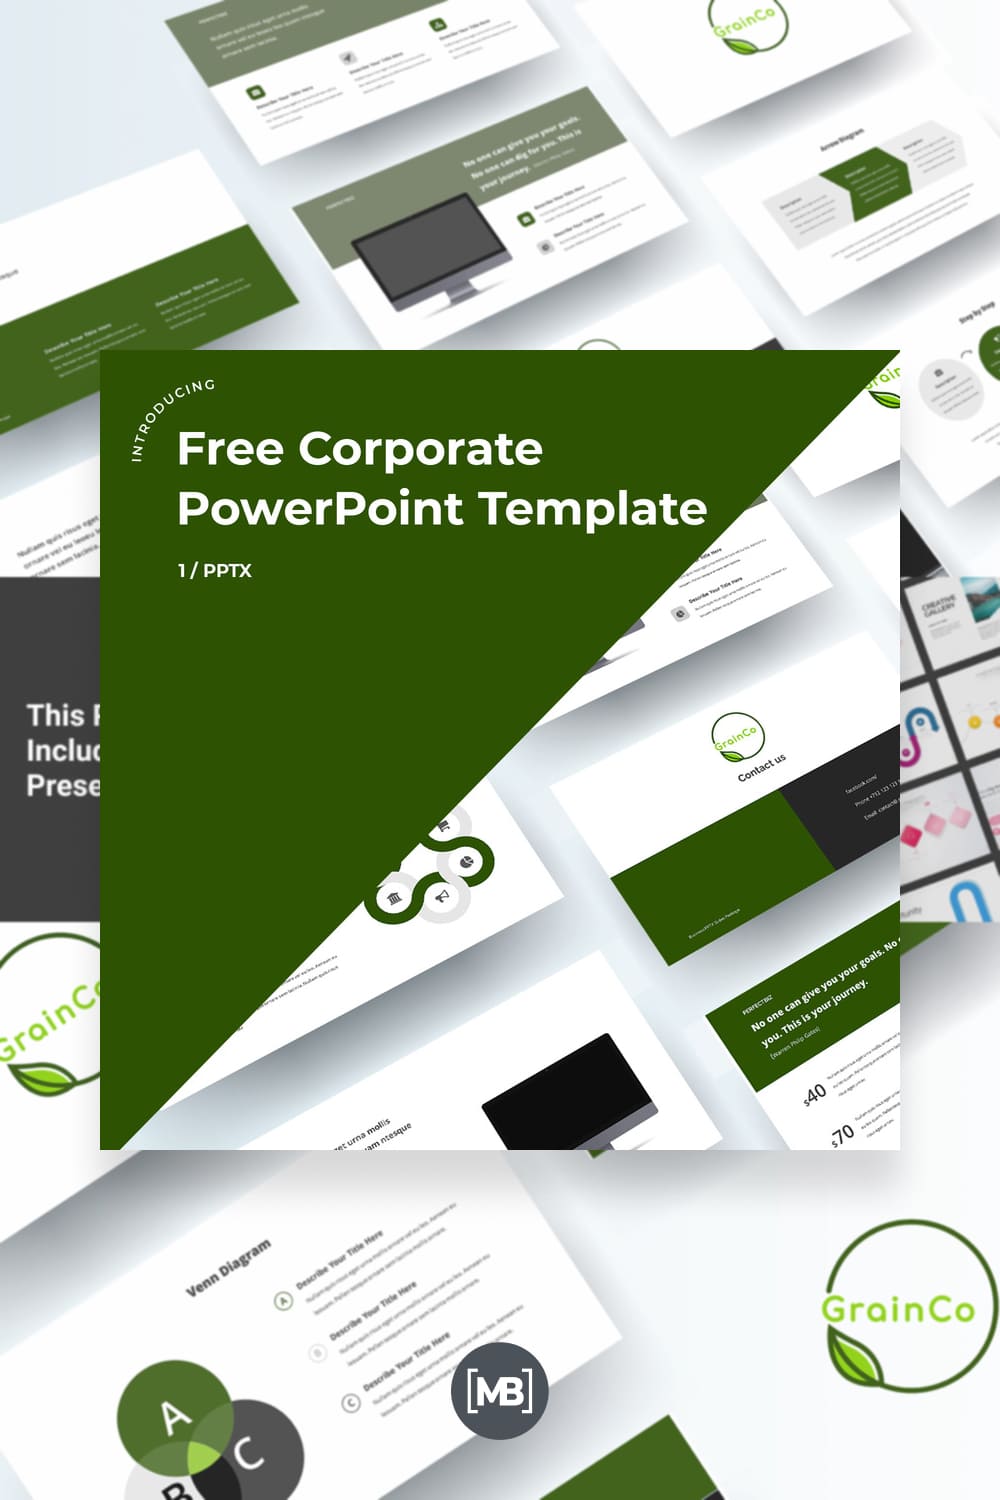 Free corporate objective template for google slides.